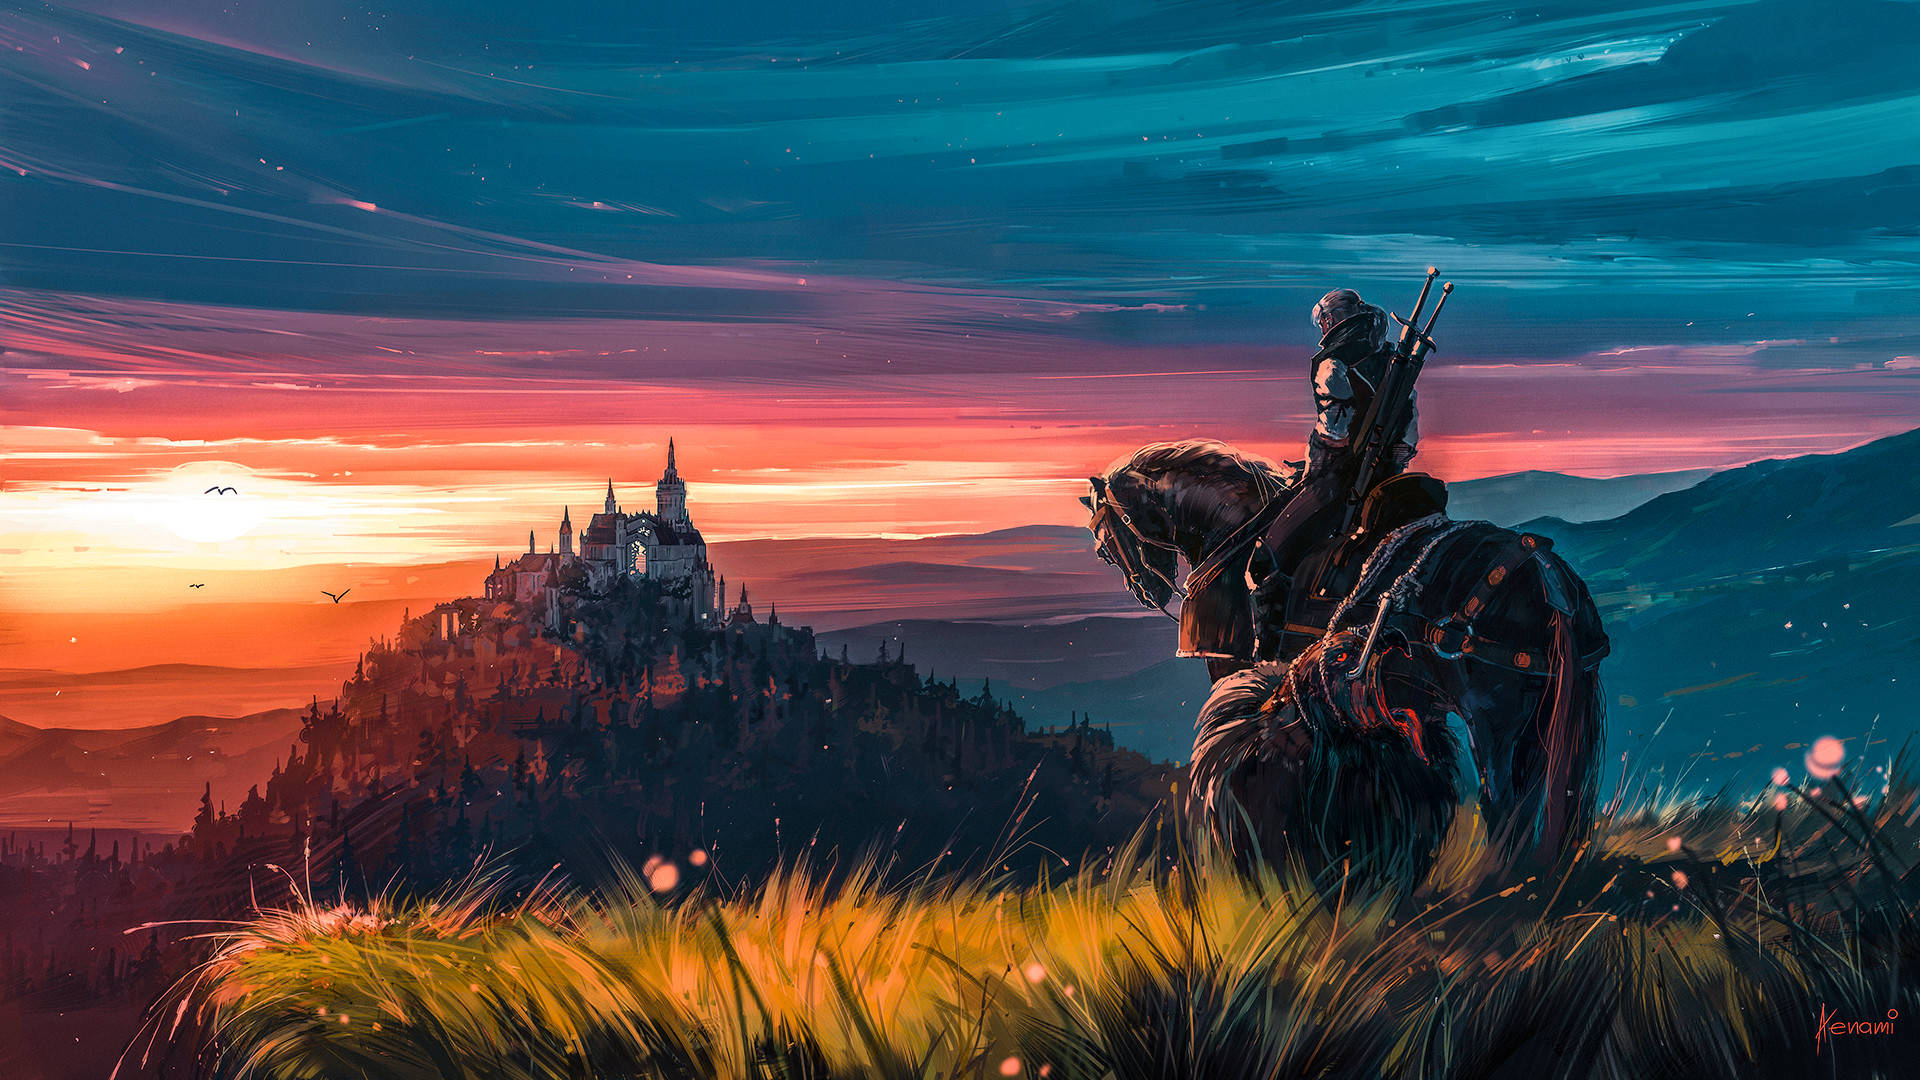 'A Scenic Hill View from The Witcher 3' Wallpaper